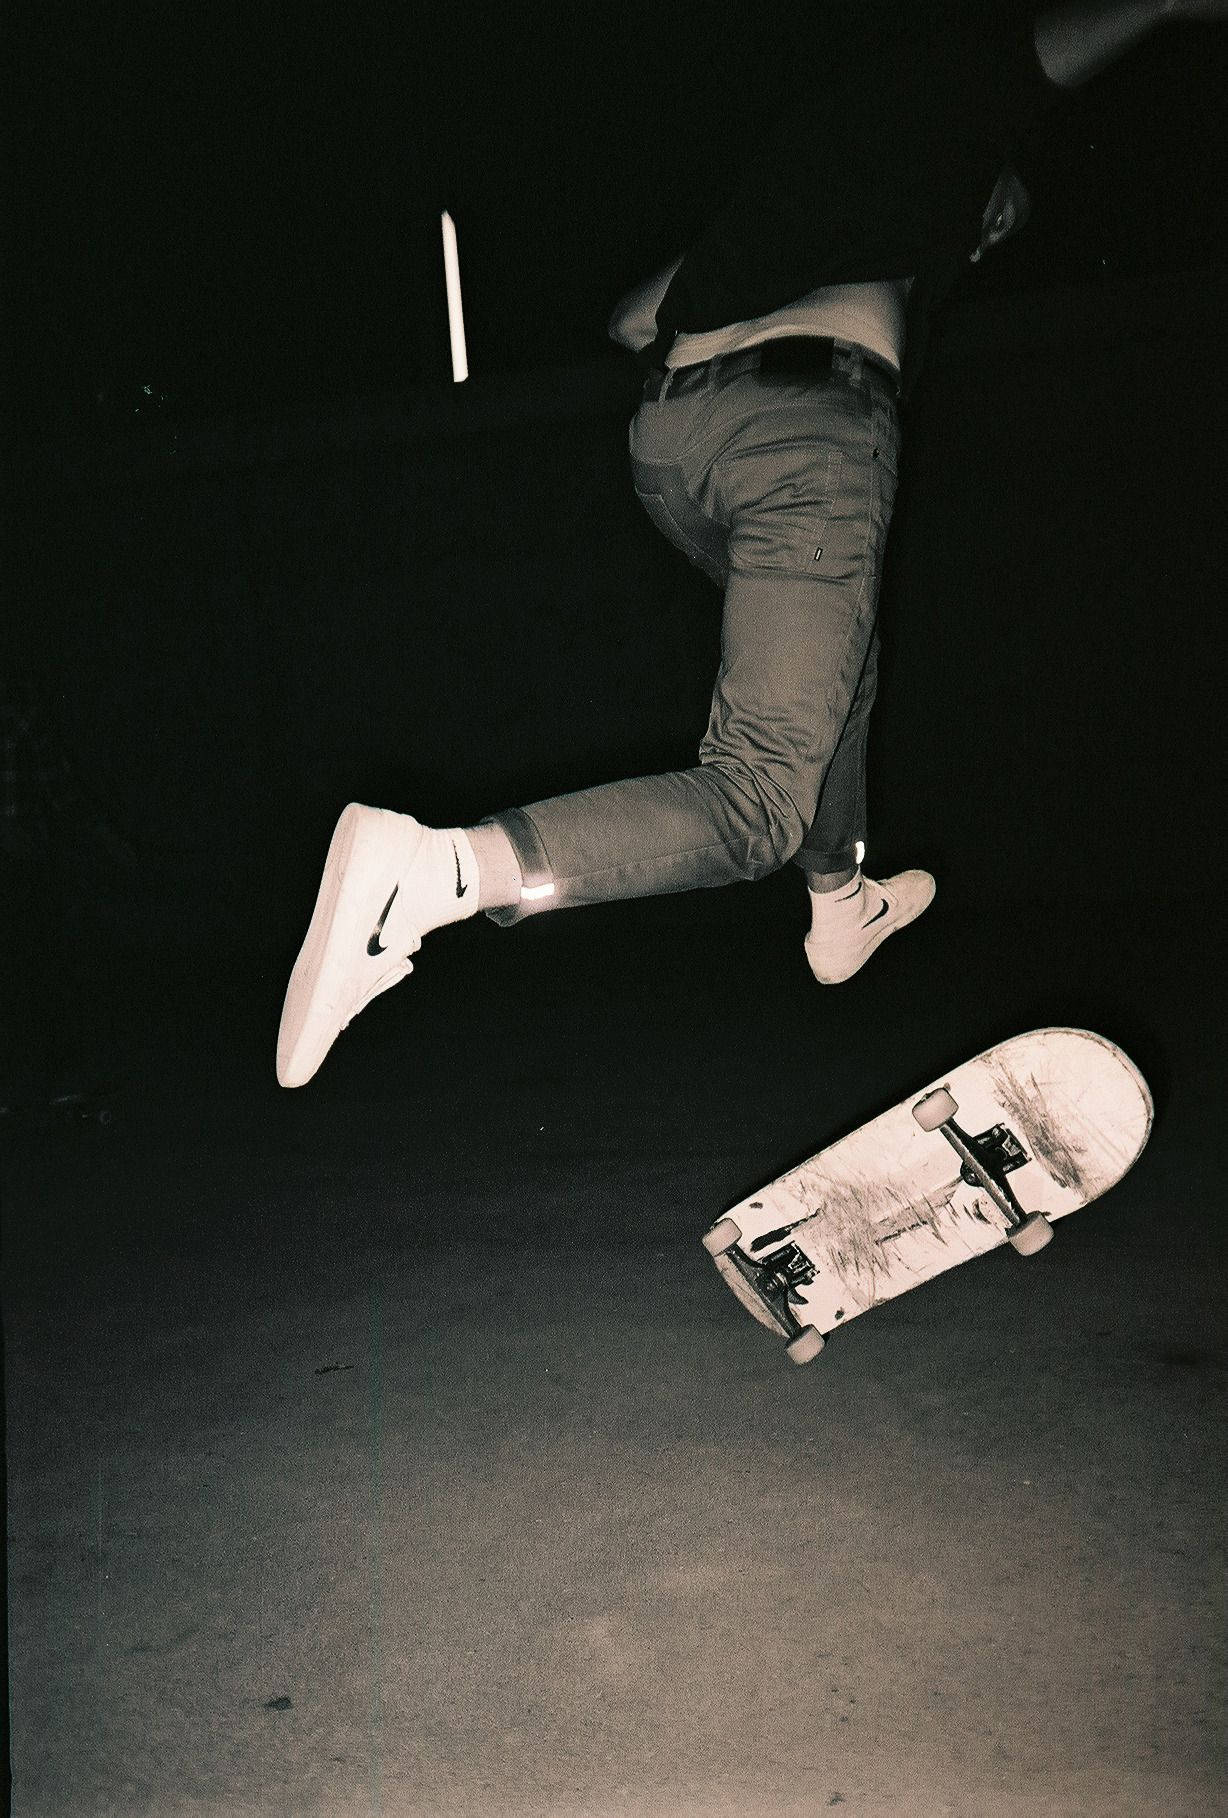 Aesthetic Skateboard Nike Air Picture